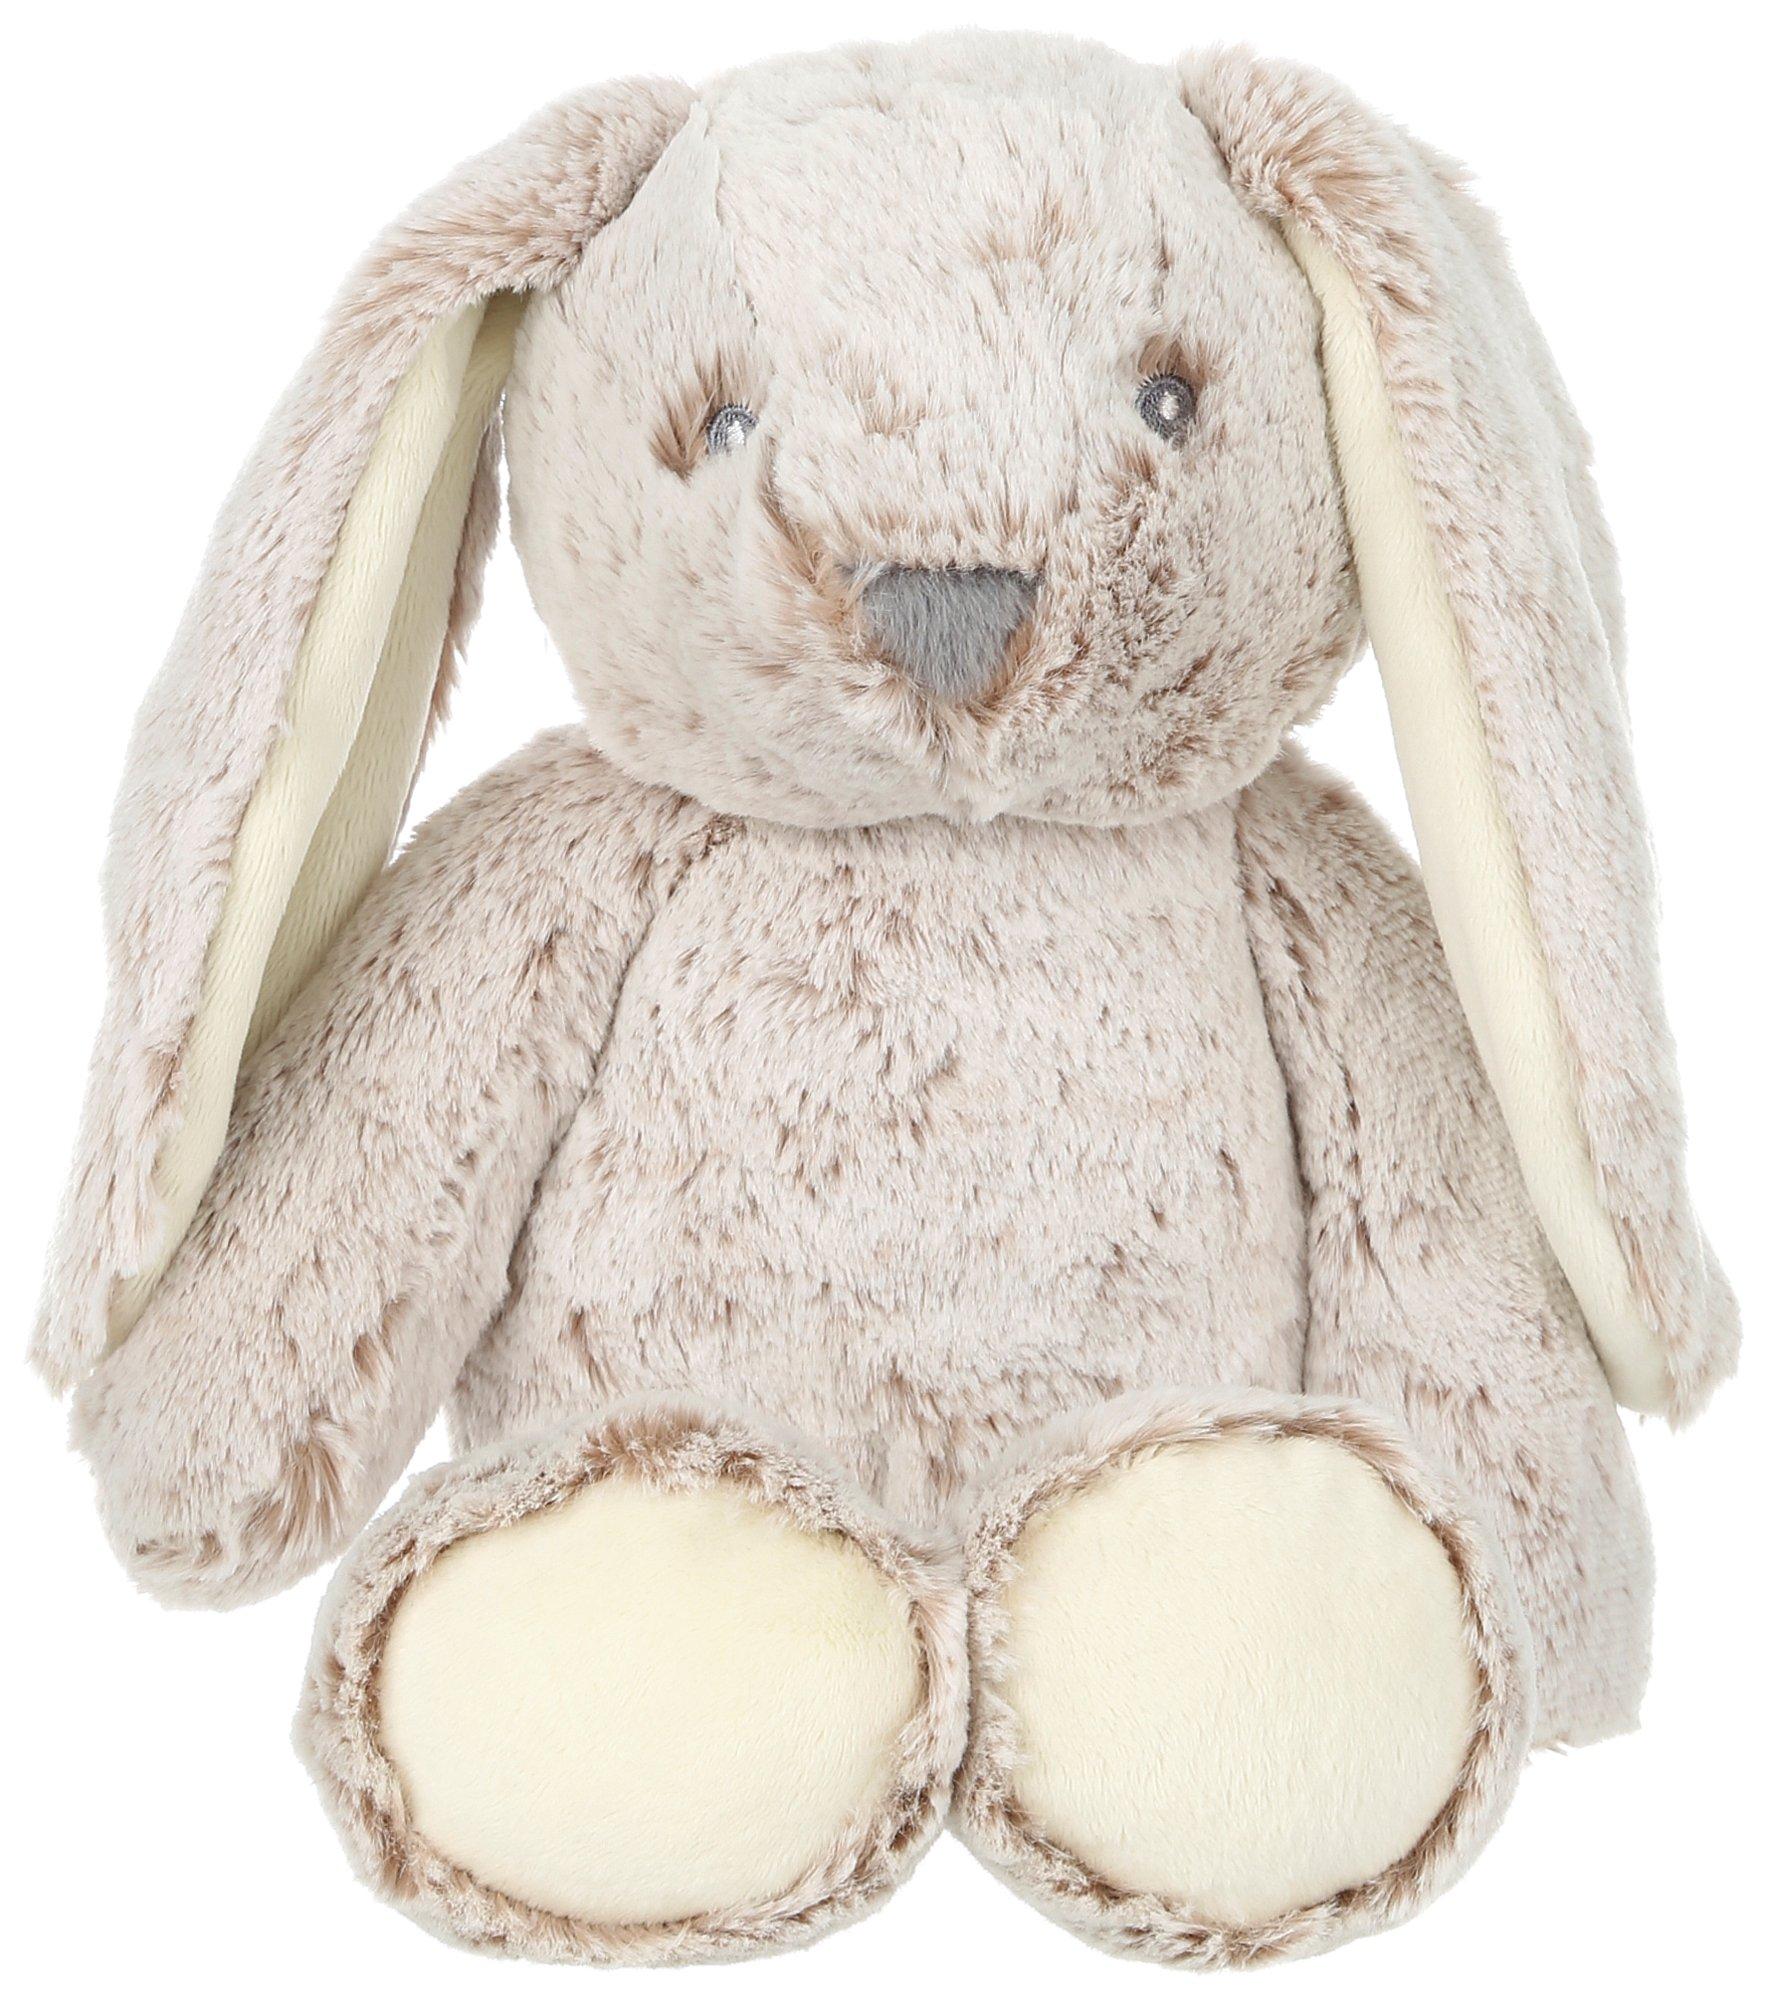 Ebba 14 in. Bree Bunny Cuddlers Plush Toy